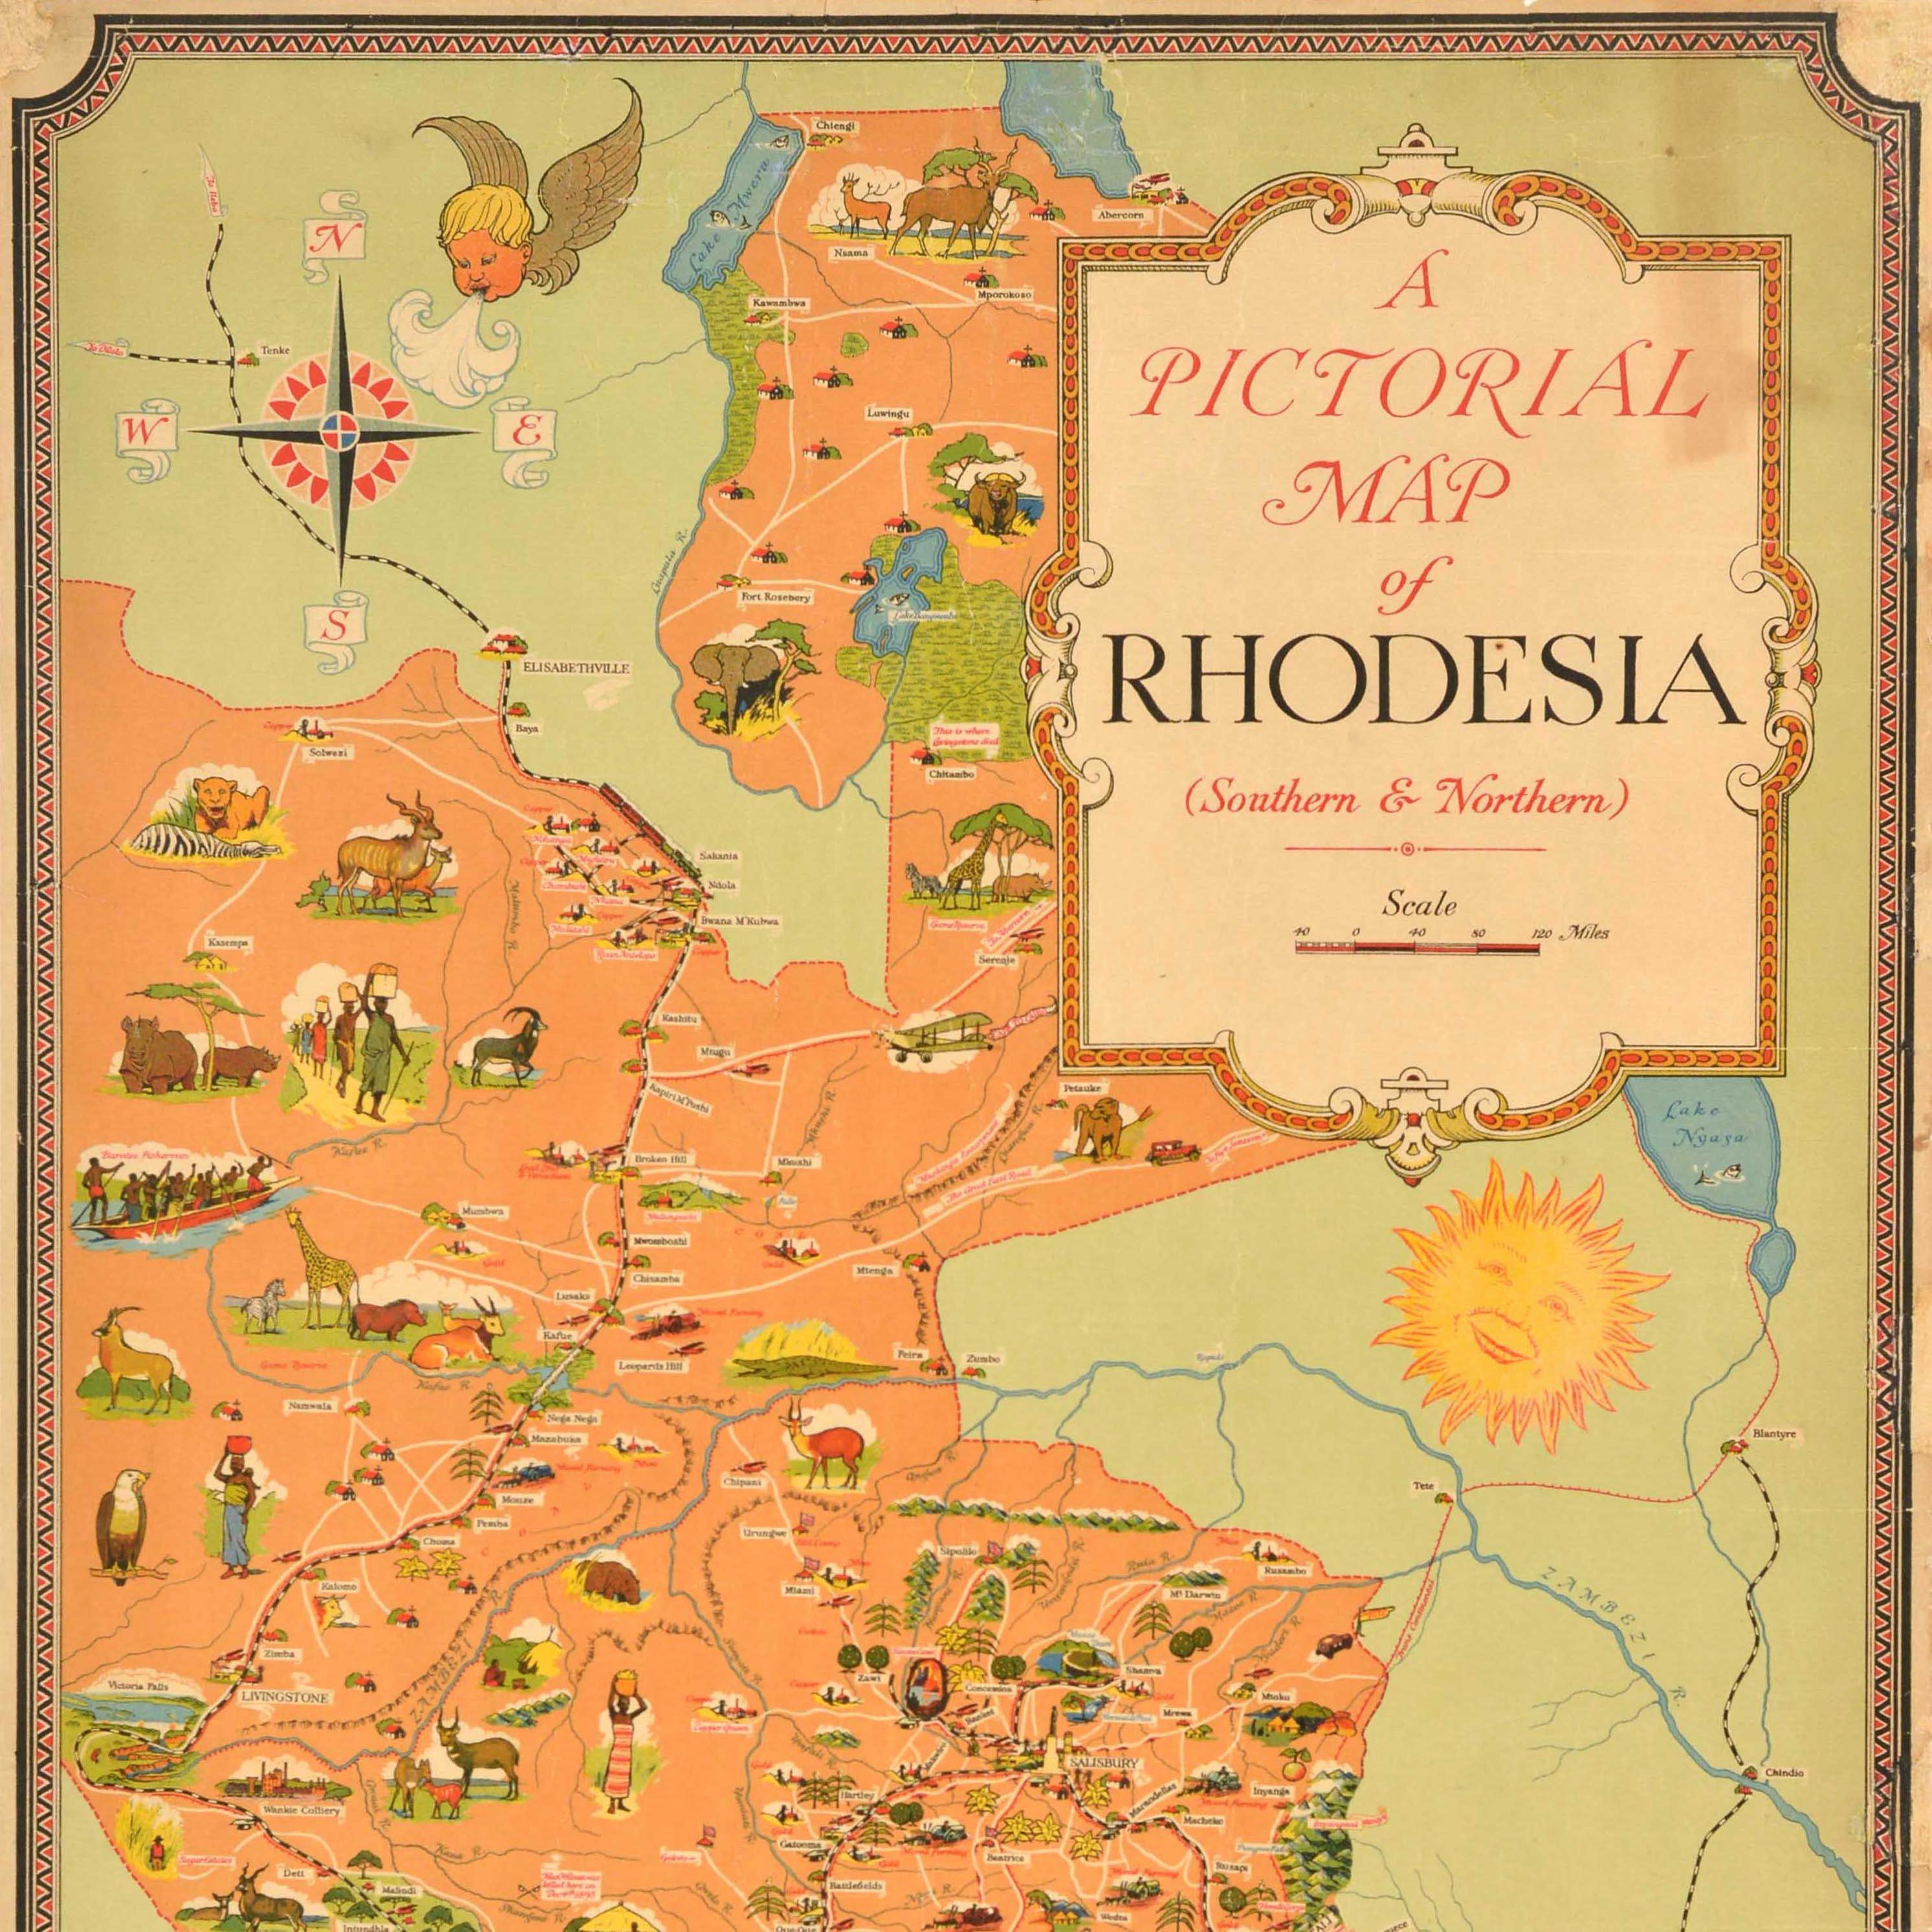 Original vintage travel poster - A Pictorial Map of Rhodesia (Southern & Northern) - featuring a colourful map of the region with the railway and road routes and illustrations of buildings, cattle, people, trees and lakes, hills, boats, trains and